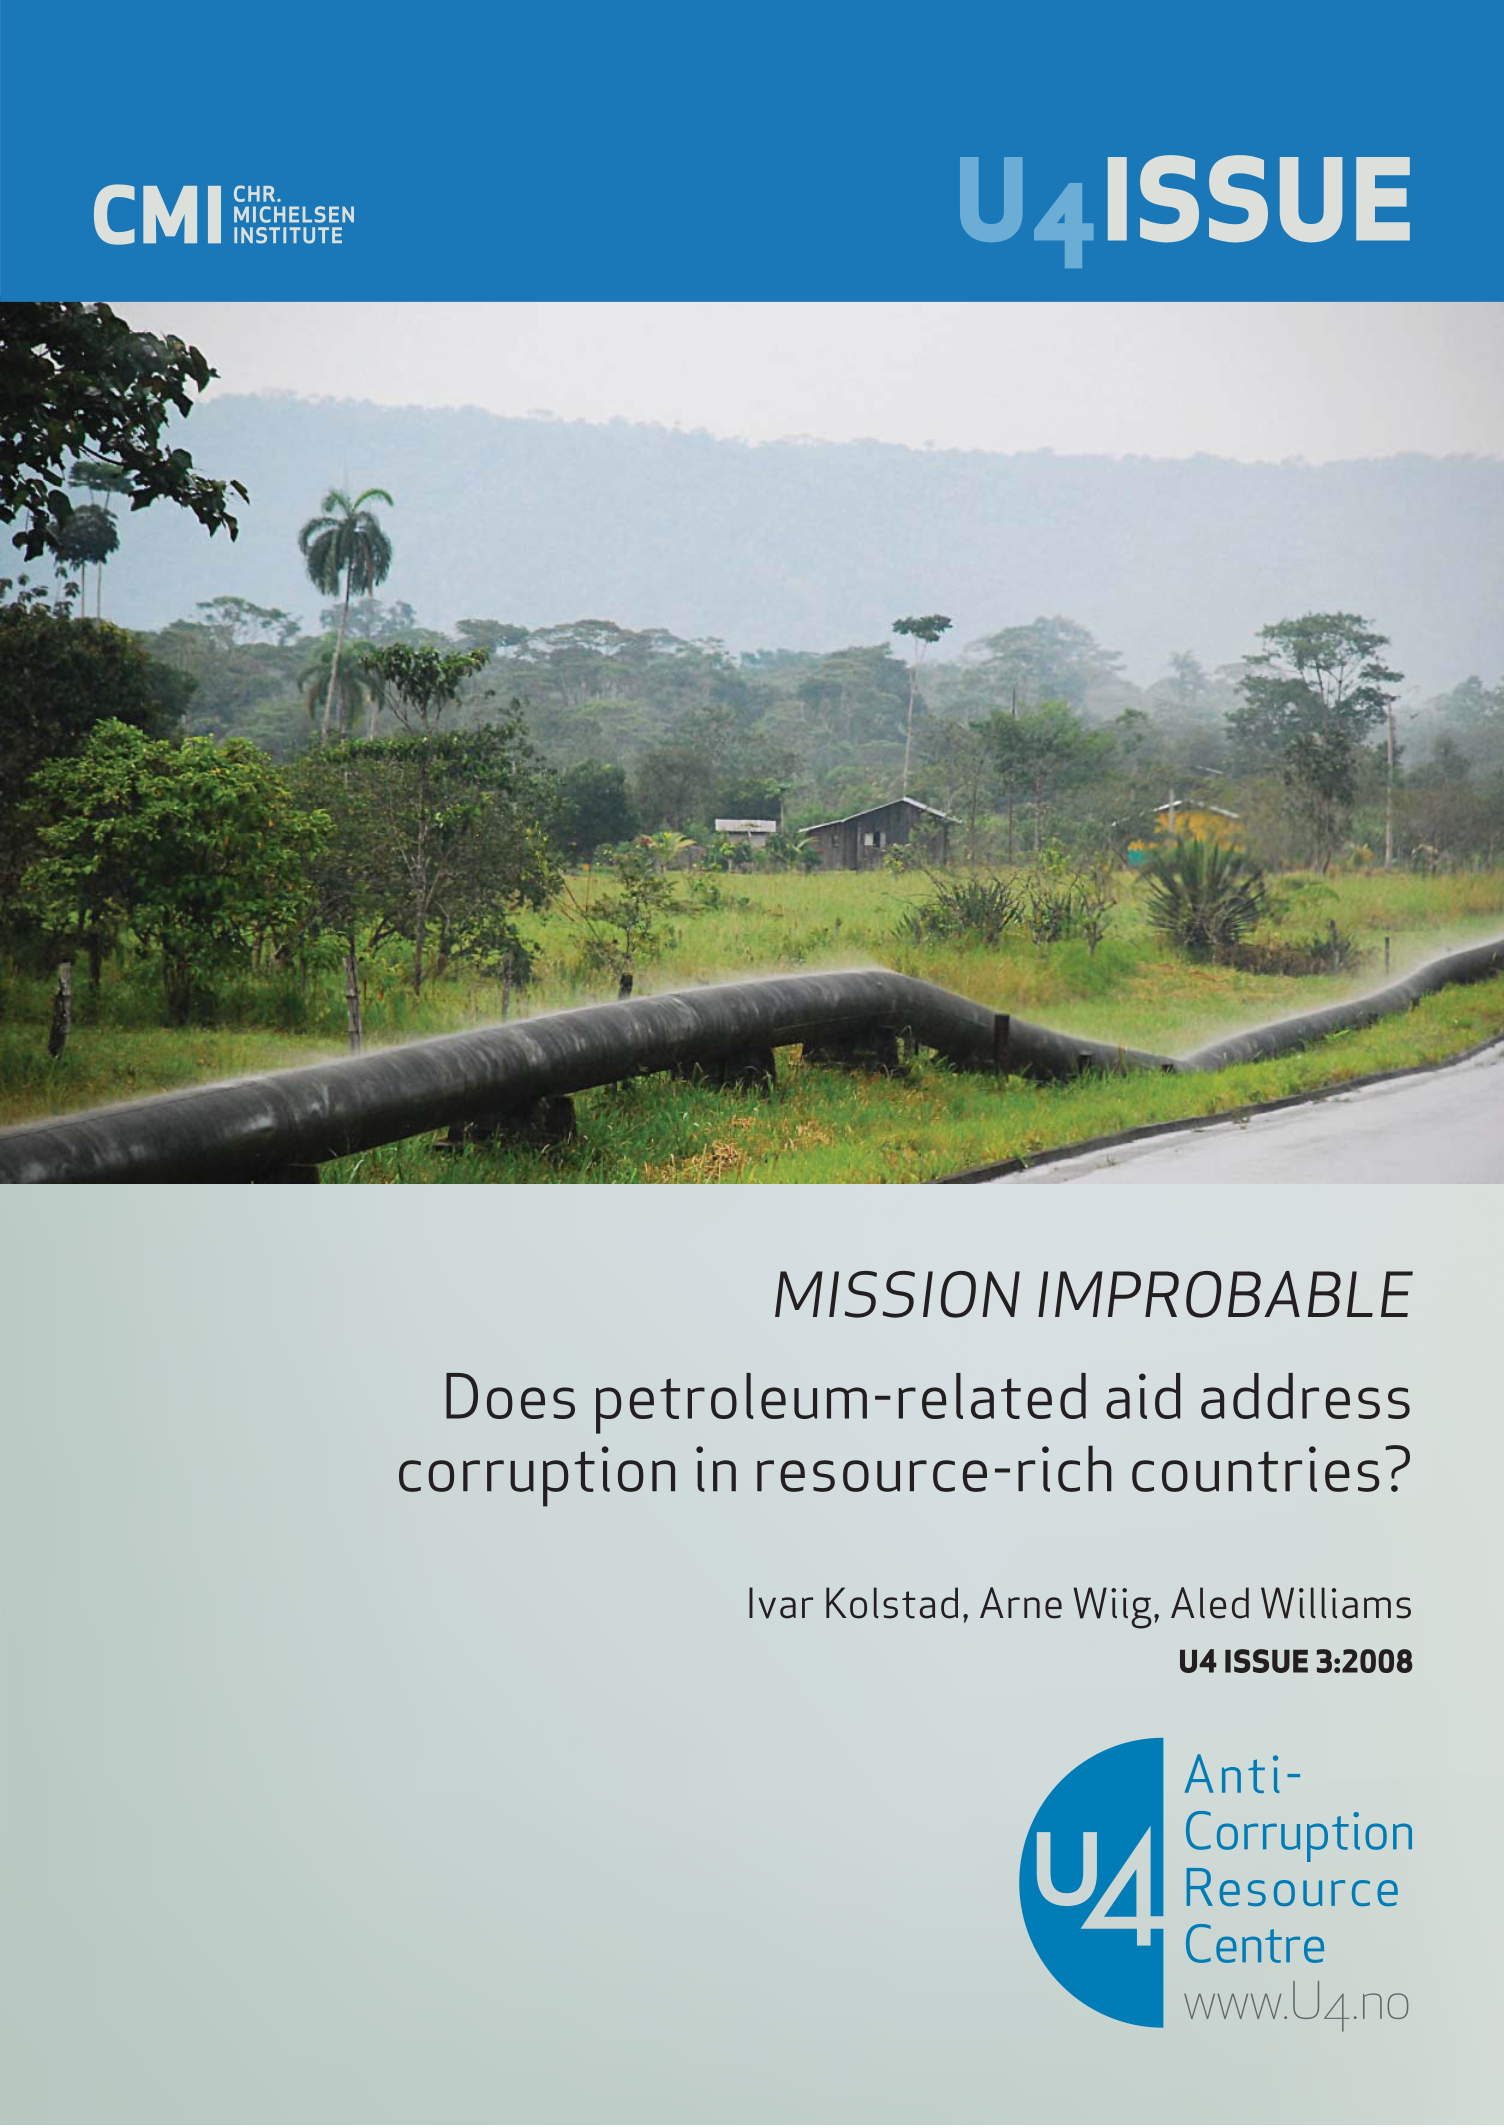 Mission Improbable: Does petroleum-related aid address corruption in resource-rich countries? 